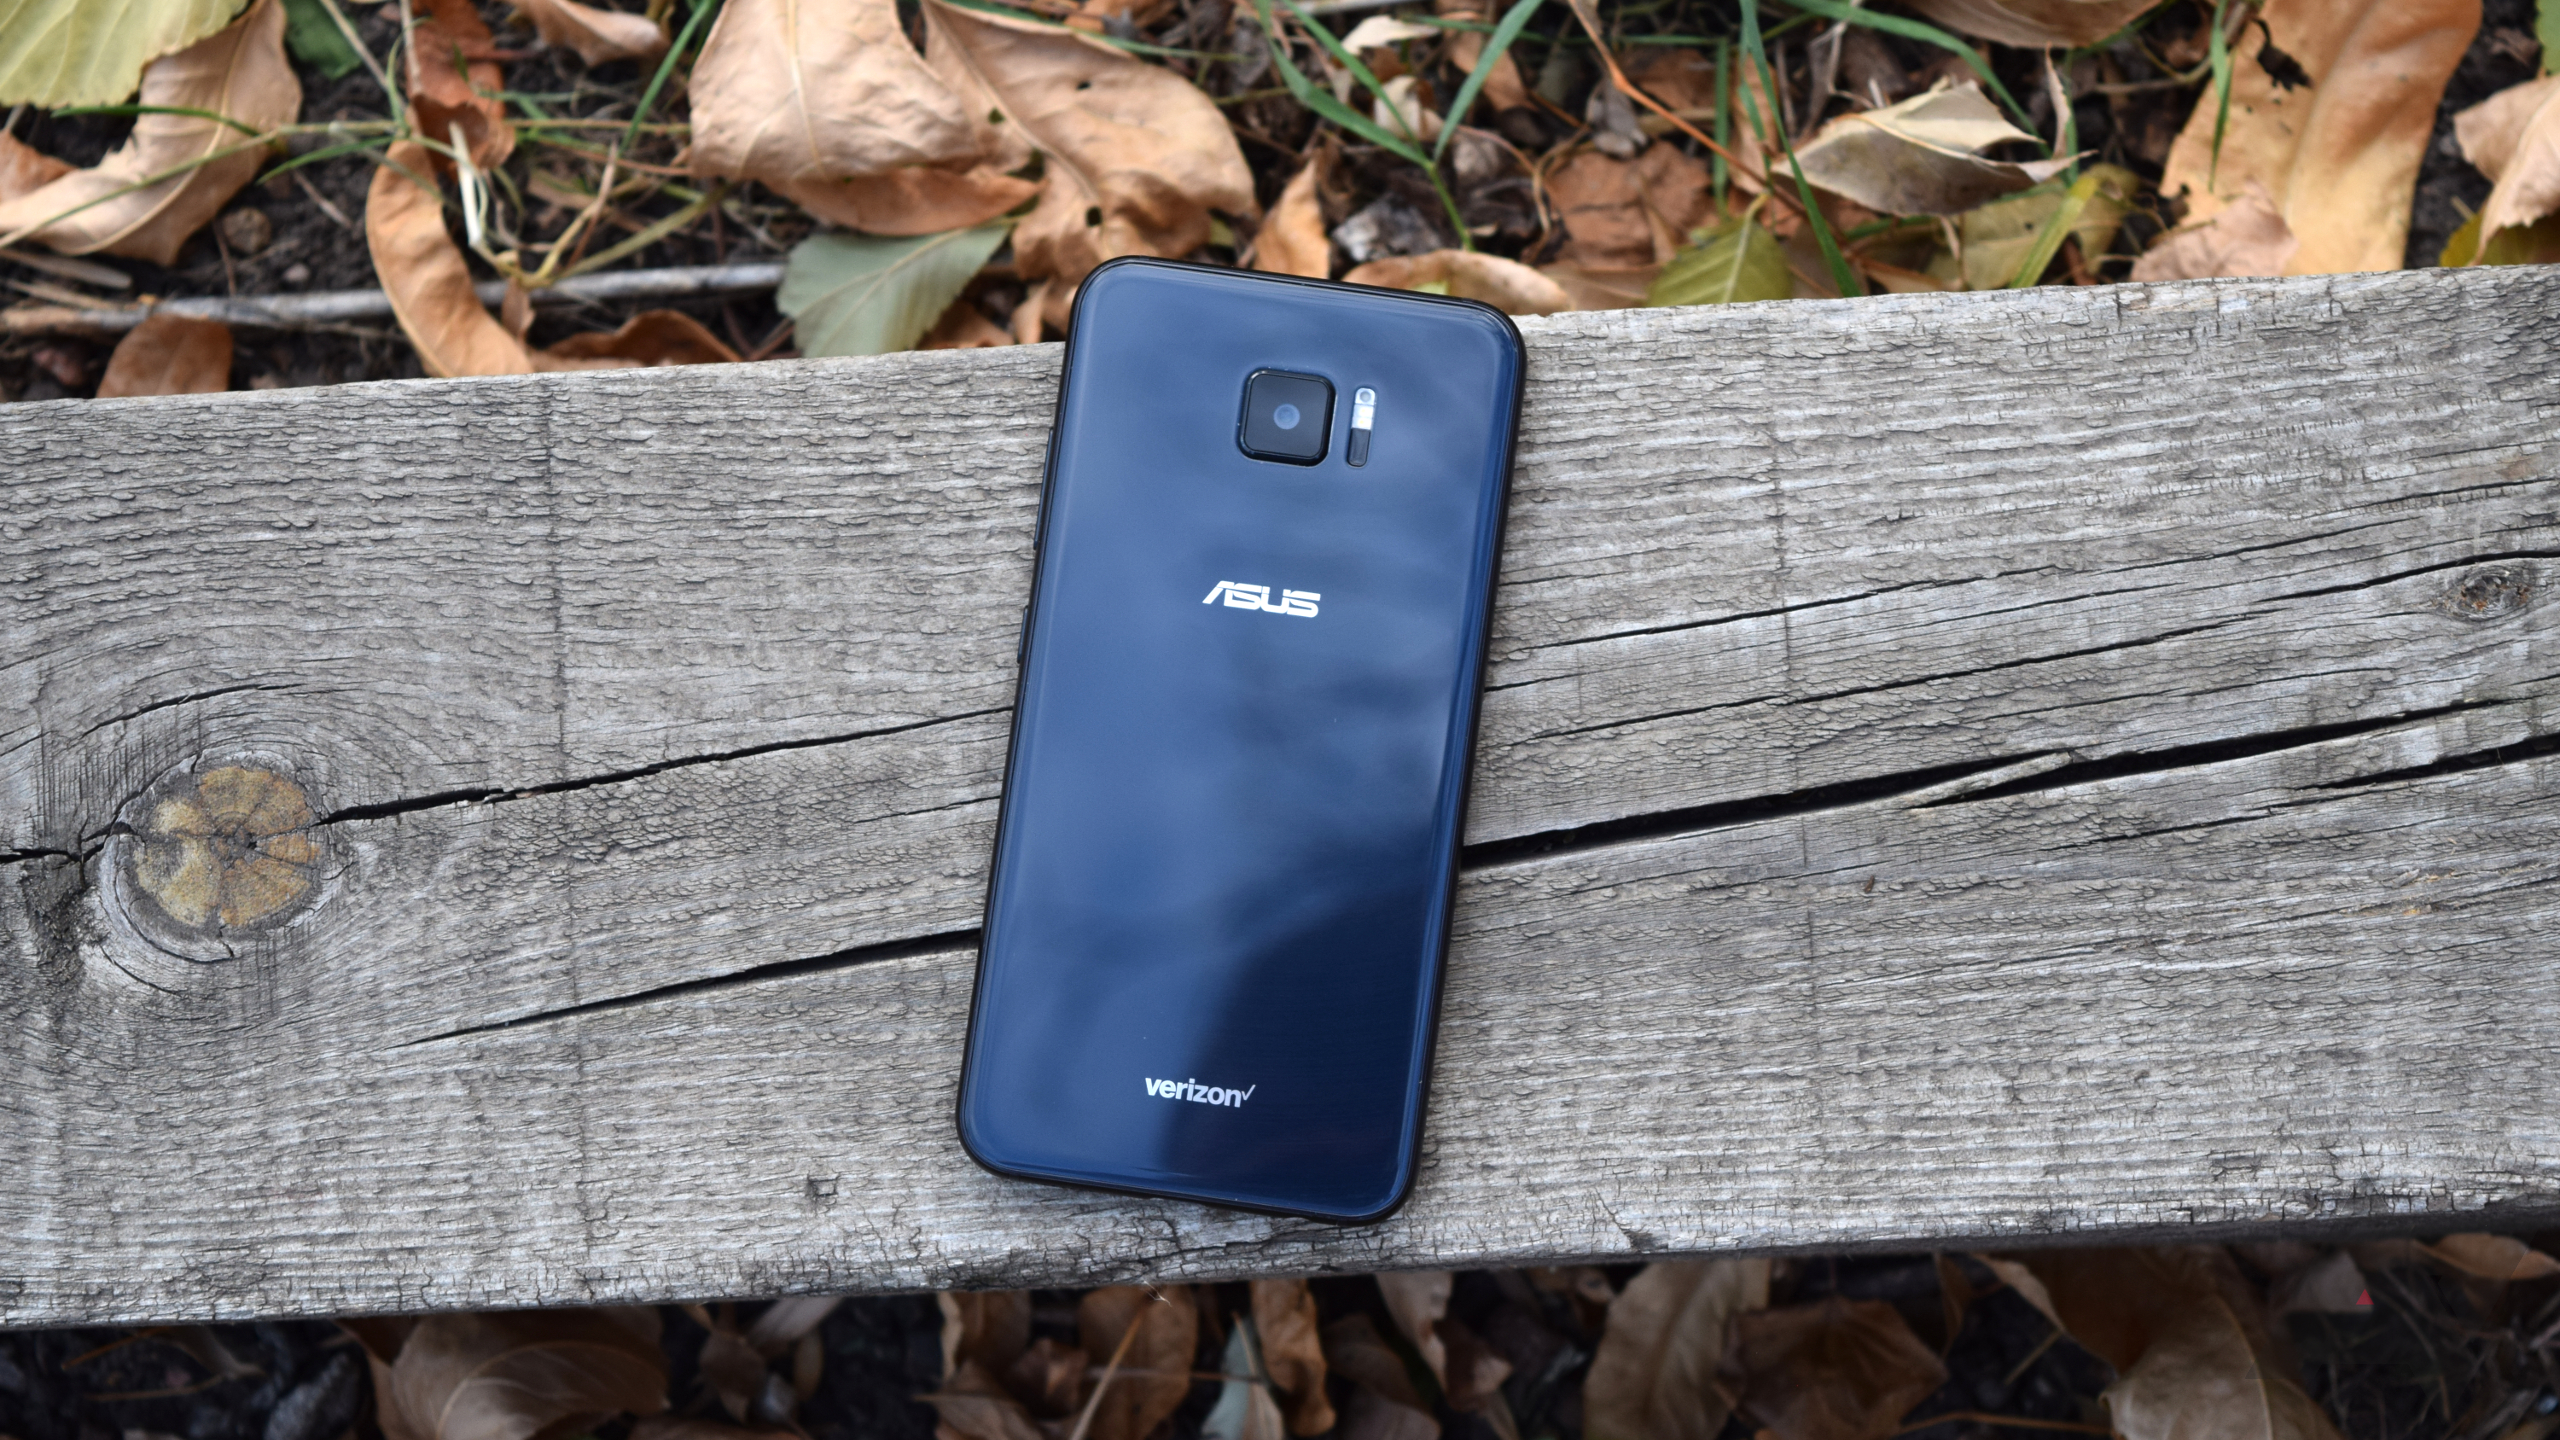 ASUS Zenfone V review: A very cheap Verizon exclusive that gets the job done